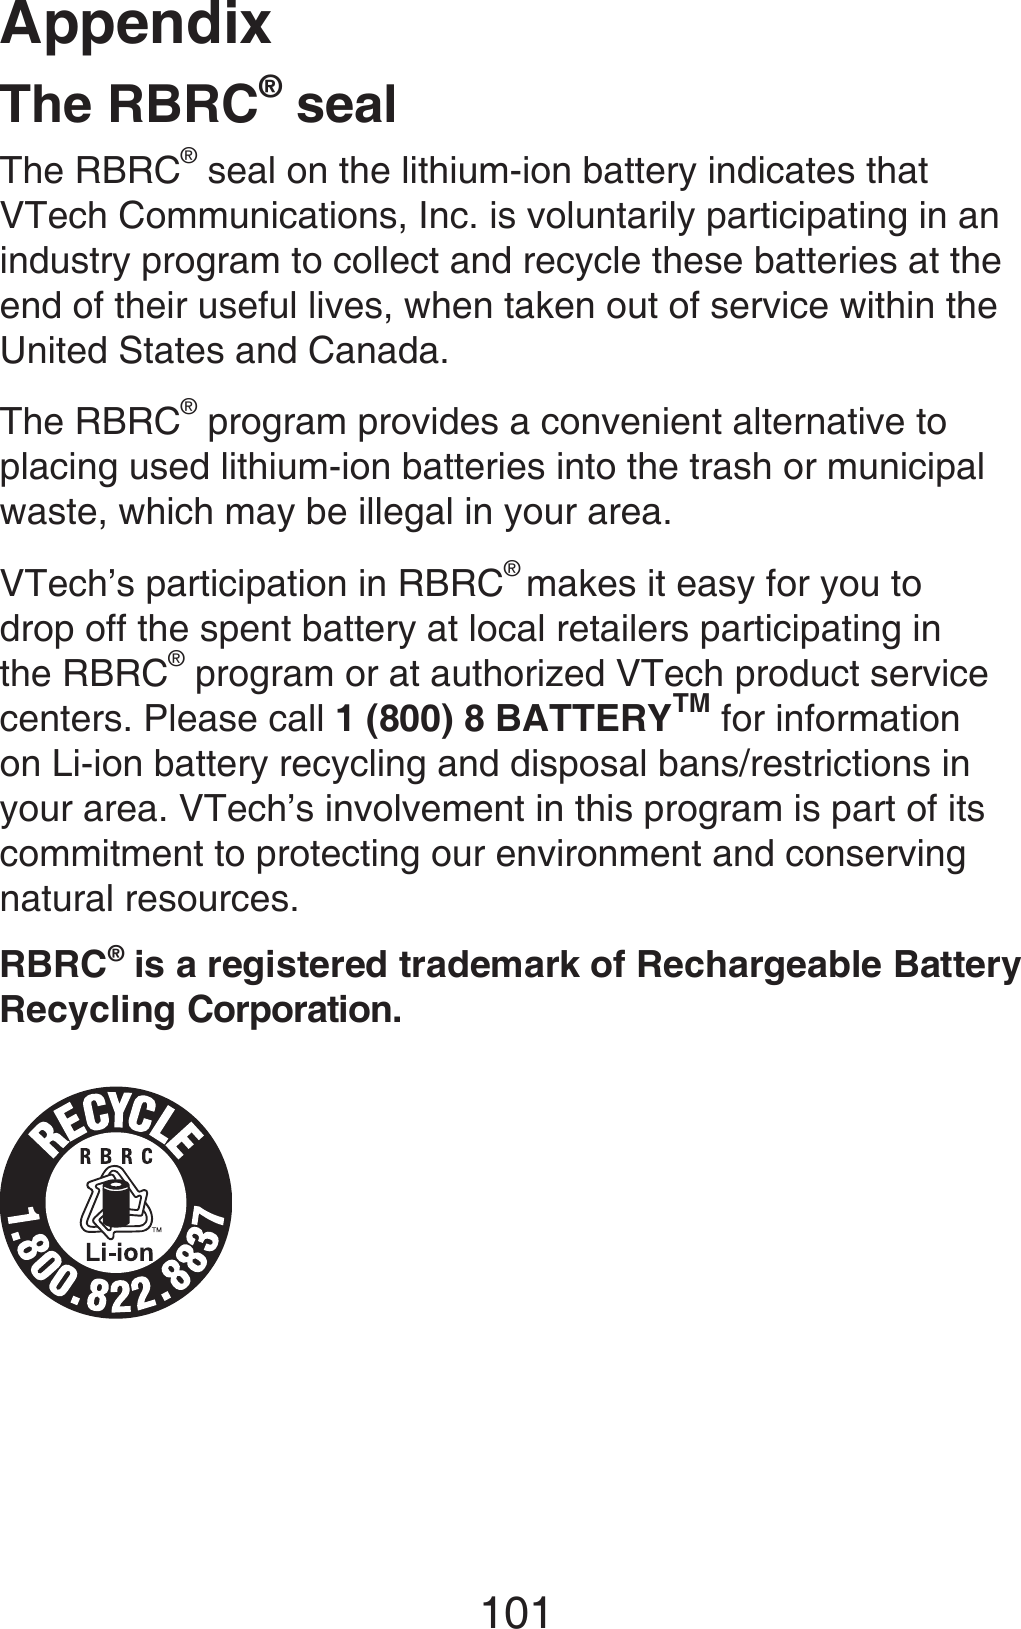 Appendix101The RBRC® sealThe RBRC® seal on the lithium-ion battery indicates that VTech Communications, Inc. is voluntarily participating in an industry program to collect and recycle these batteries at the end of their useful lives, when taken out of service within the United States and Canada.The RBRC® program provides a convenient alternative to placing used lithium-ion batteries into the trash or municipal waste, which may be illegal in your area.VTech’s participation in RBRC® makes it easy for you to drop off the spent battery at local retailers participating in the RBRC® program or at authorized VTech product service centers. Please call 1 (800) 8 BATTERYTM for information on Li-ion battery recycling and disposal bans/restrictions in your area. VTech’s involvement in this program is part of its commitment to protecting our environment and conserving natural resources.RBRC® is a registered trademark of Rechargeable Battery Recycling Corporation.